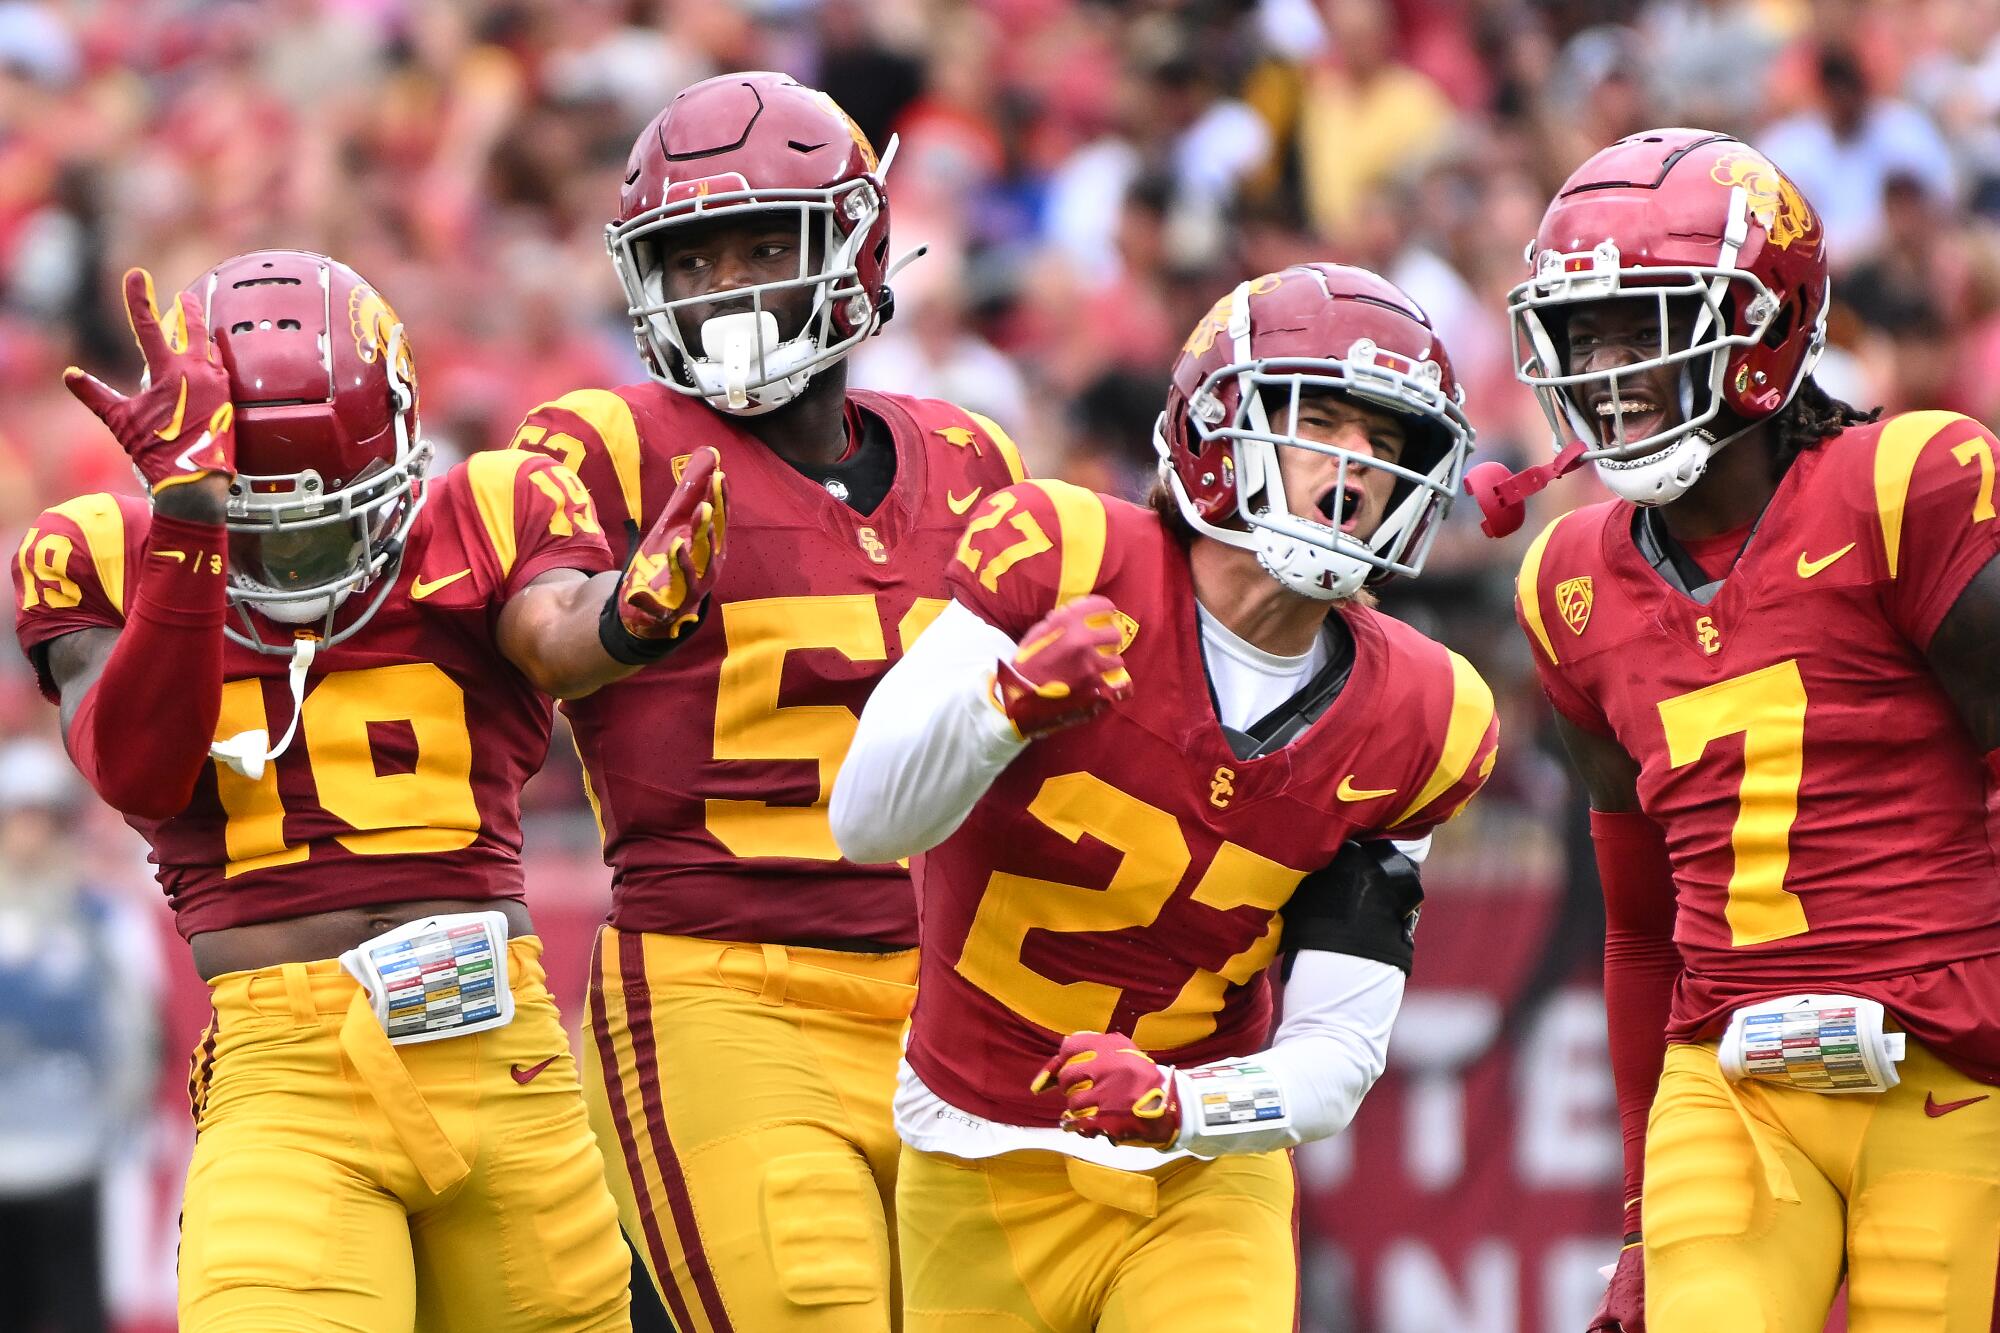 USC players celebrate during Saturday's game